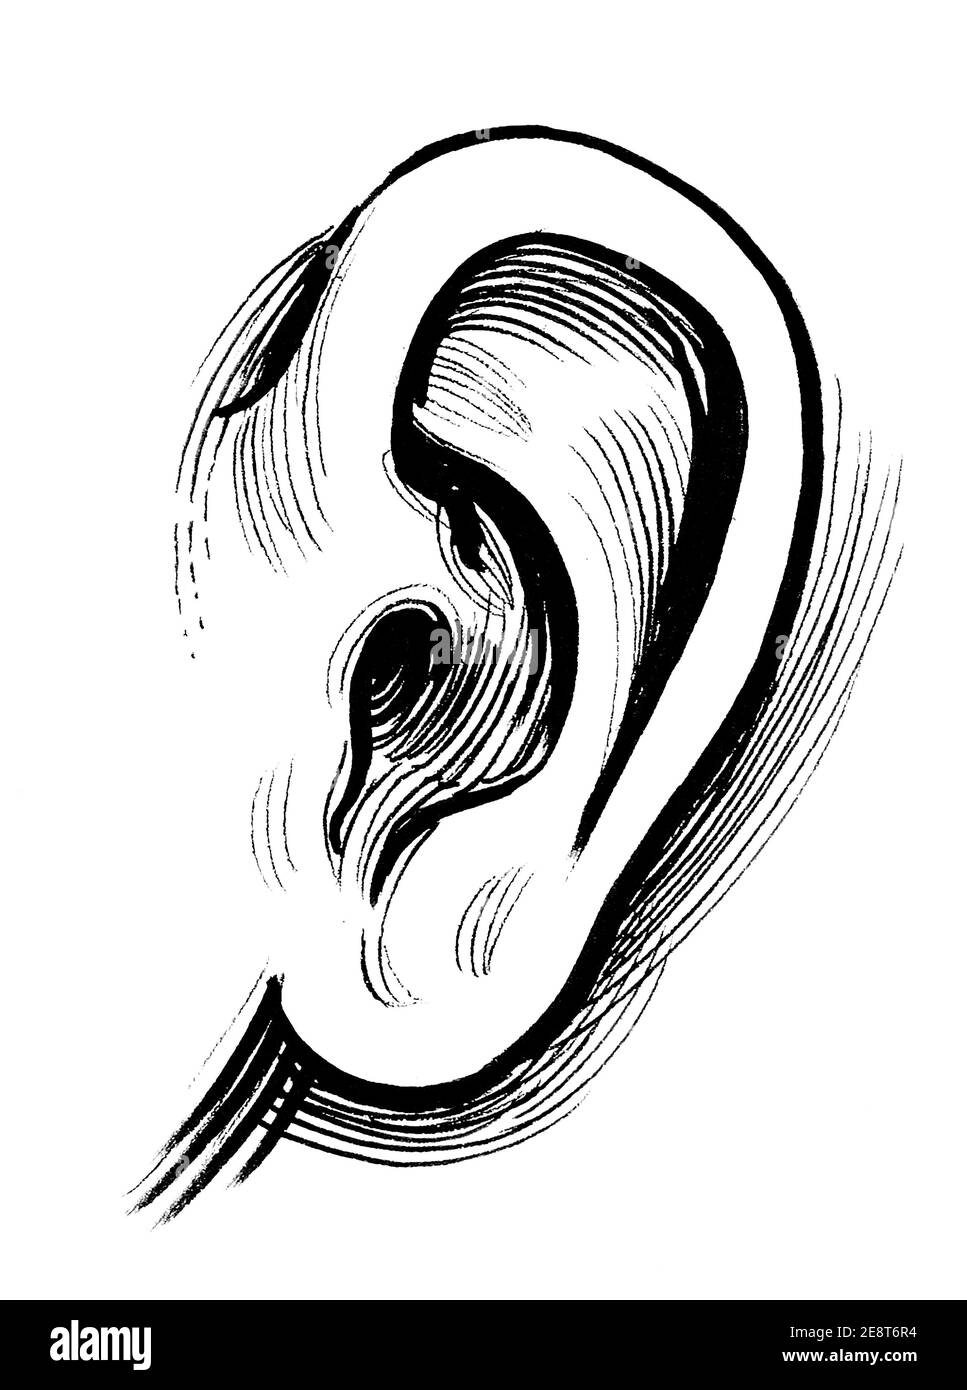 Ink black and white drawing of a human ear Stock Photo